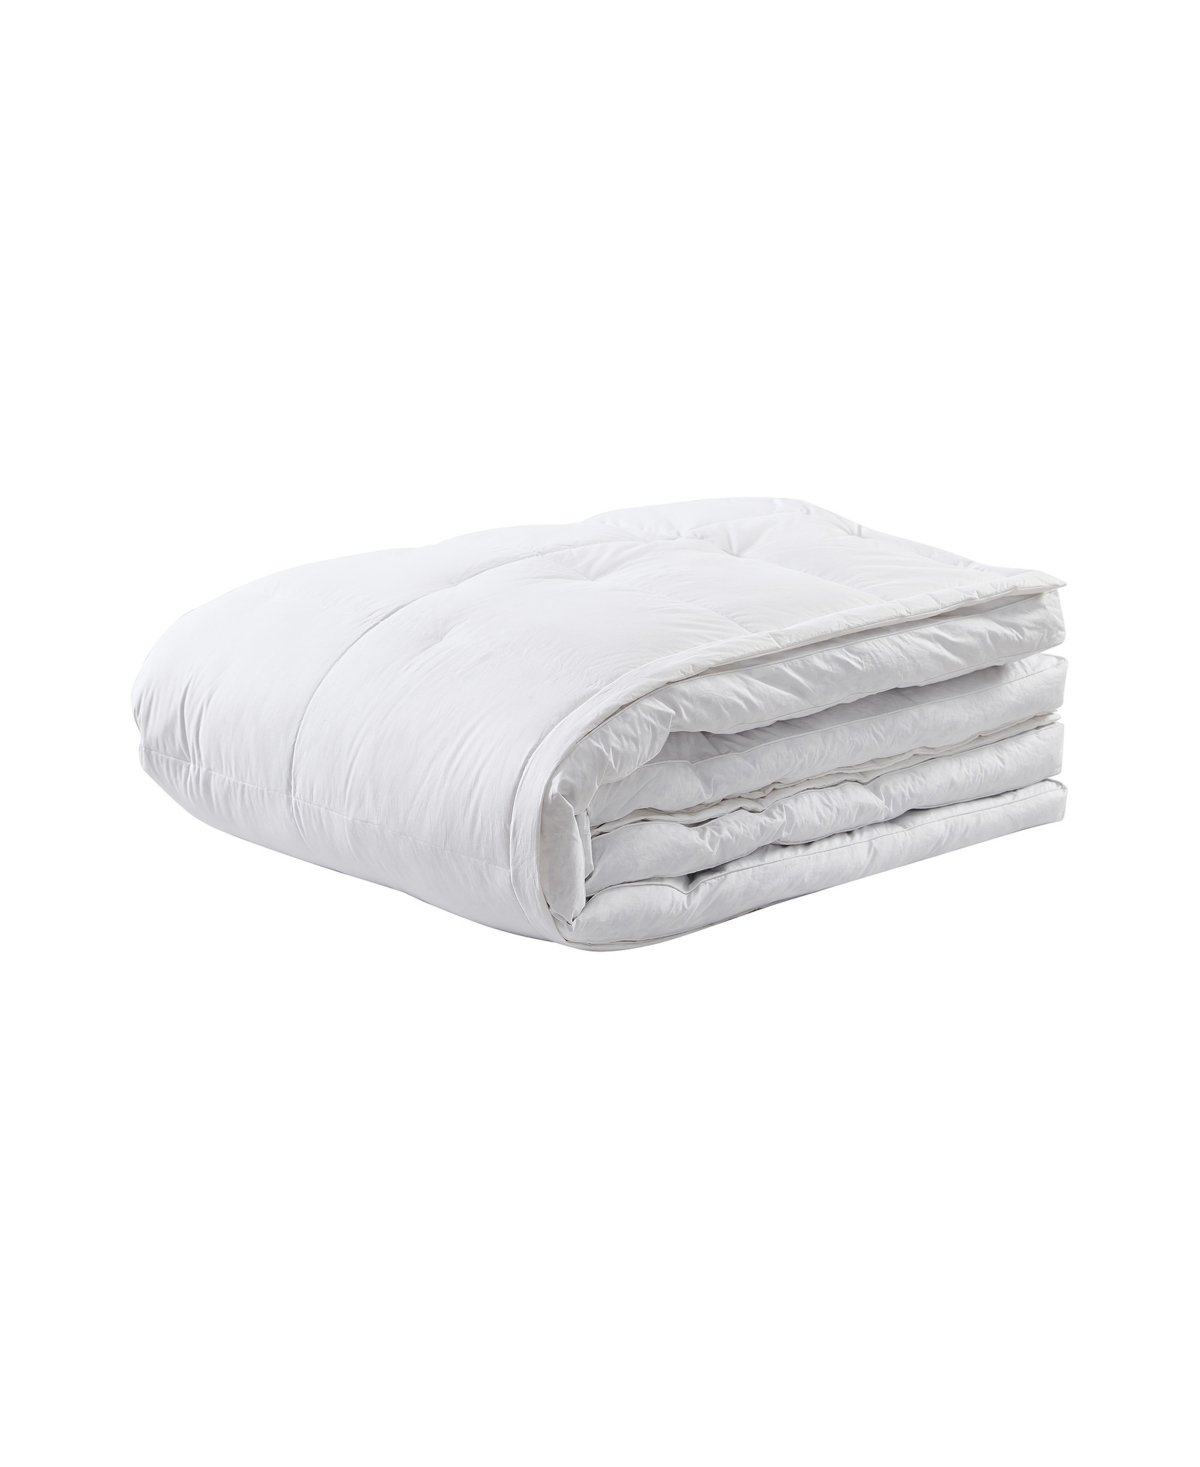 Serta Heiq Cooling 3" White Downtop Featherbeds, Queen